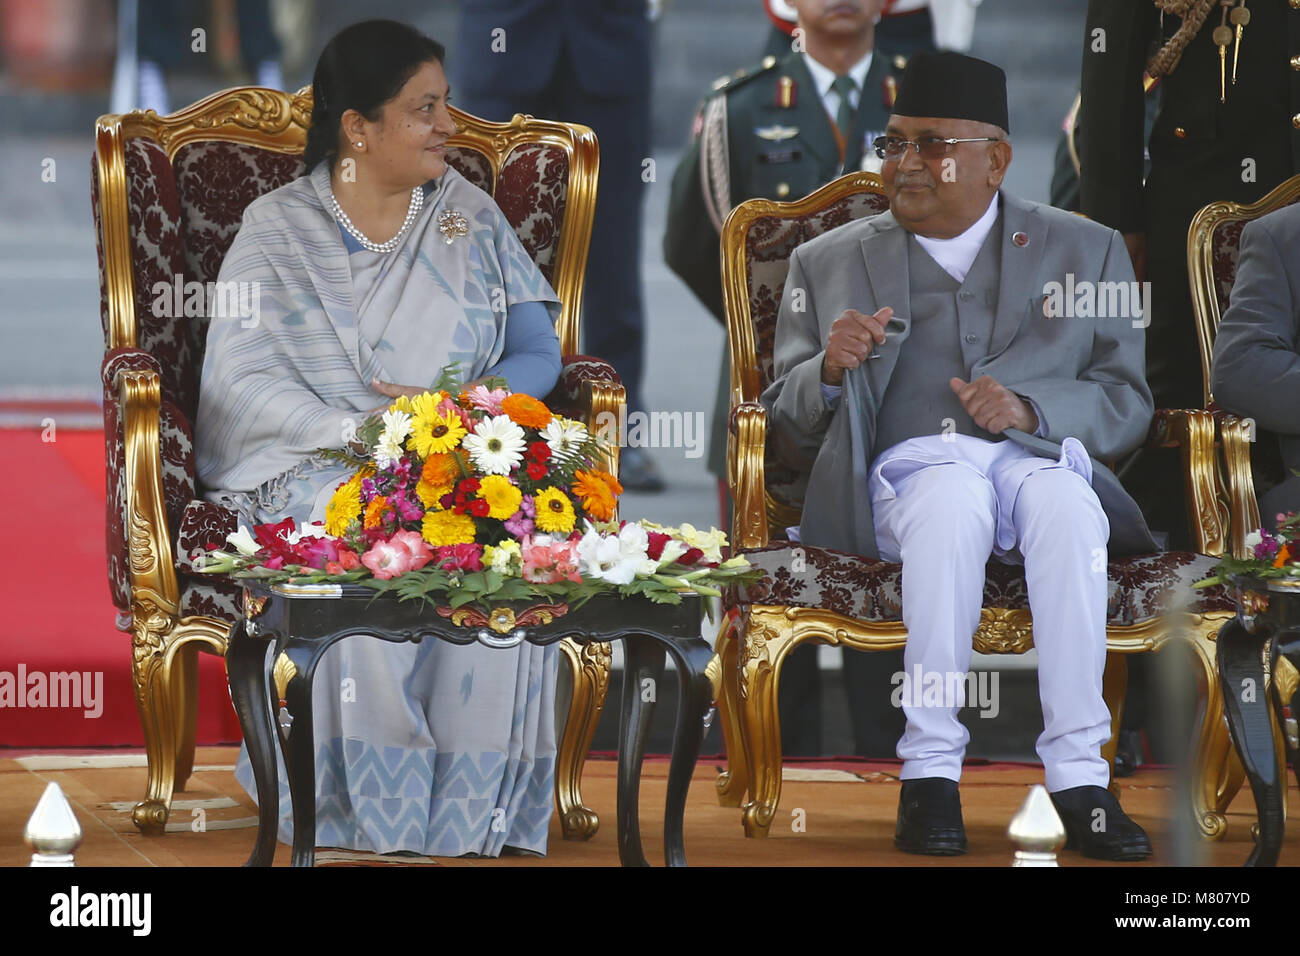 Kathmandu, Nepal. 14th Mar, 2018. President Bidhya Devi Bhandari and Prime Minister KP Sharma Oli look on after taking her oath as being re-elected to a second term at the Presidential Office in Kathmandu, Nepal on Wednesday, March 14, 2018. Credit: Skanda Gautam/ZUMA Wire/Alamy Live News Stock Photo